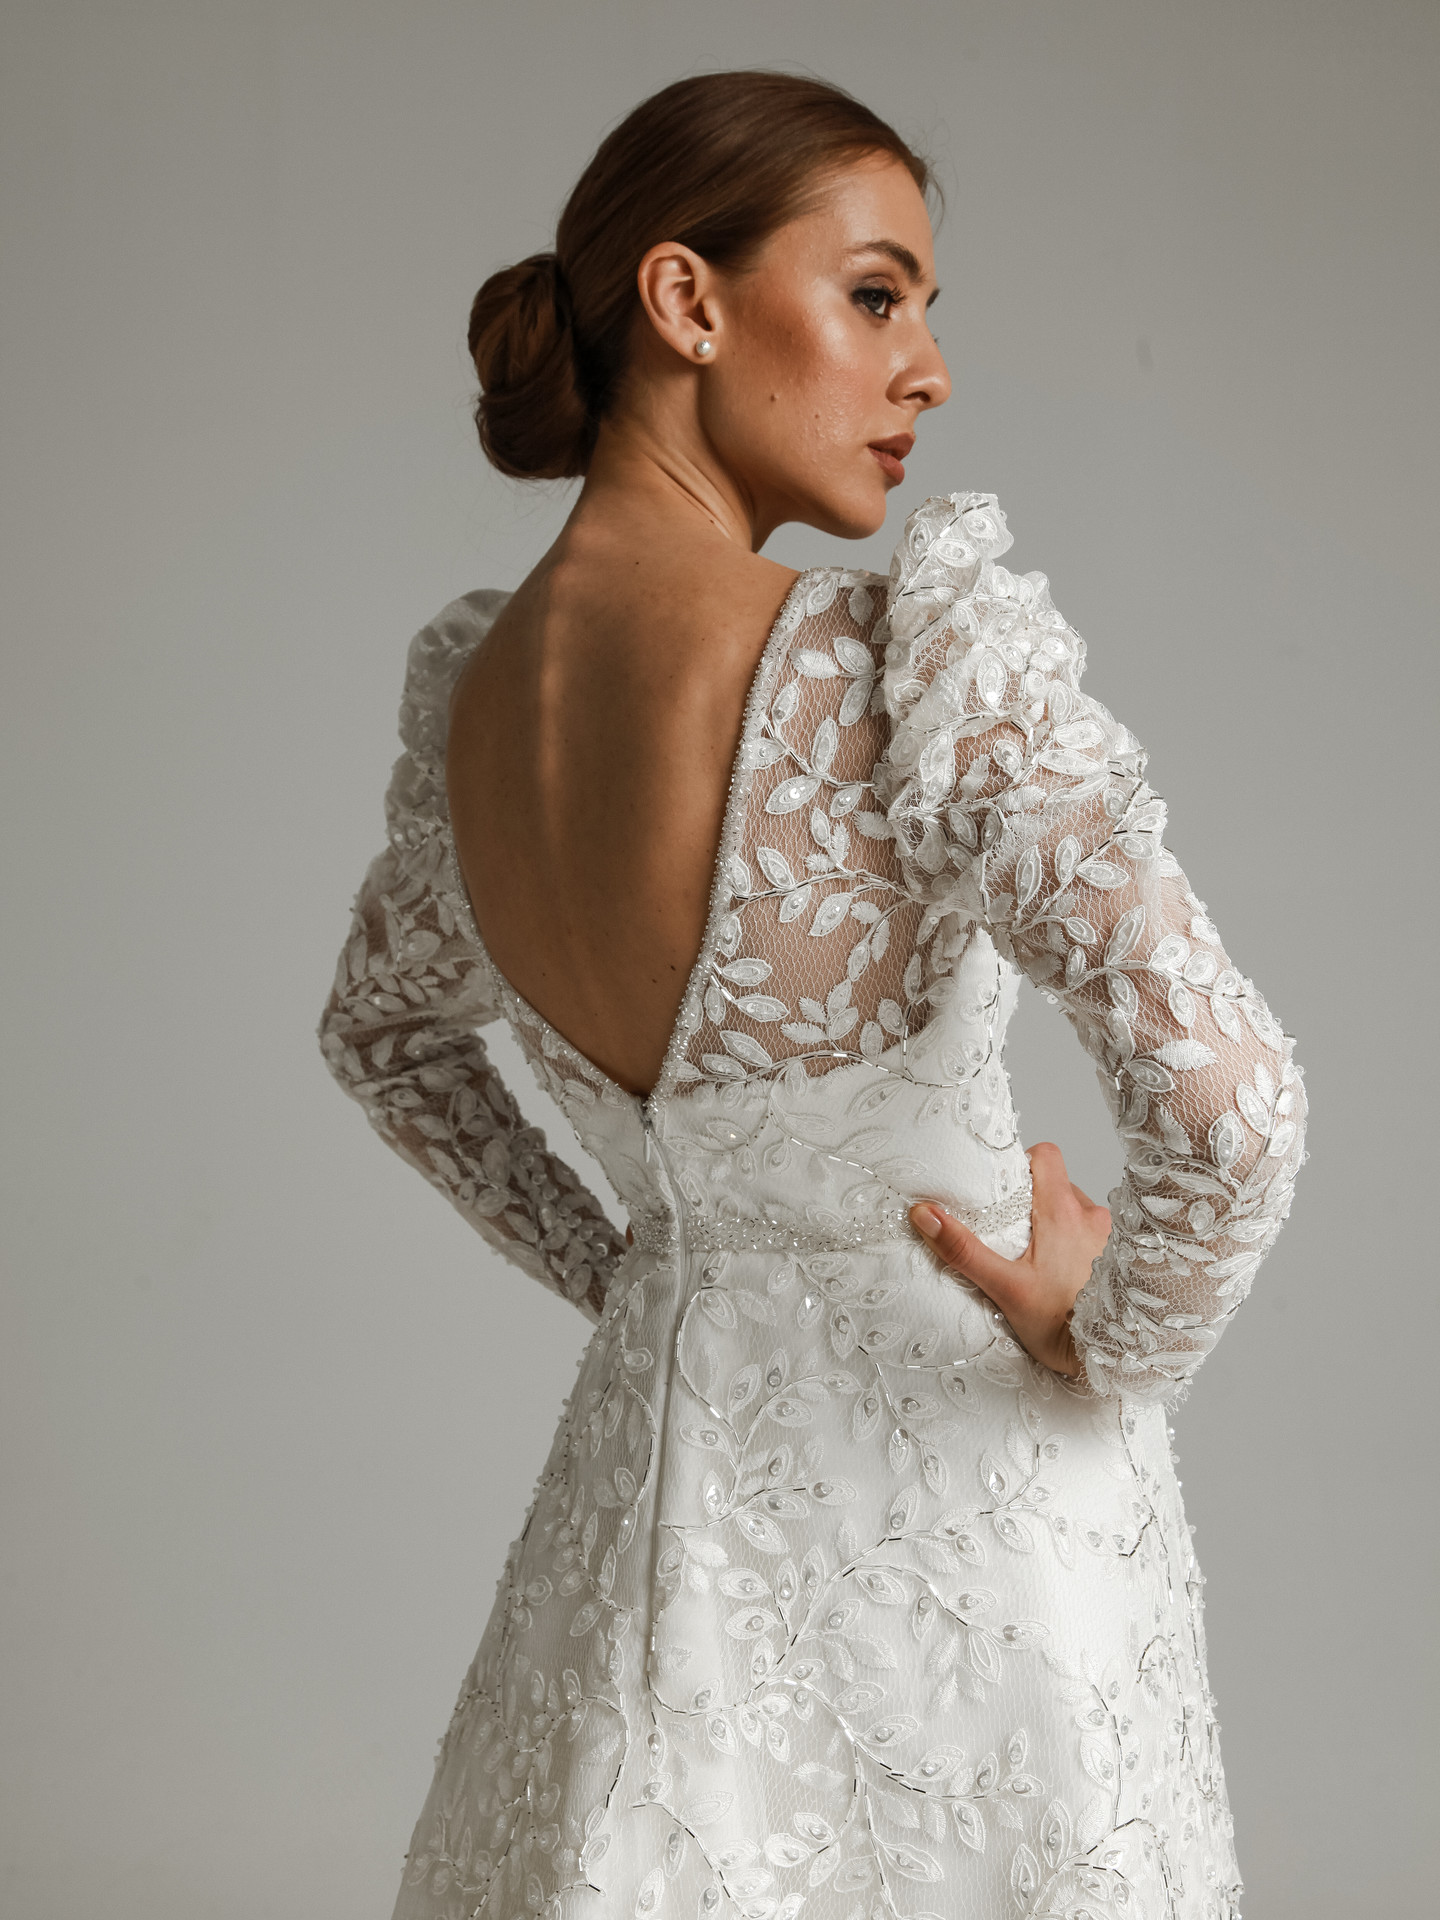 Monclair gown, 2021, couture, dress, bridal, off-white, lace, A-line, embroidery, train, sleeves